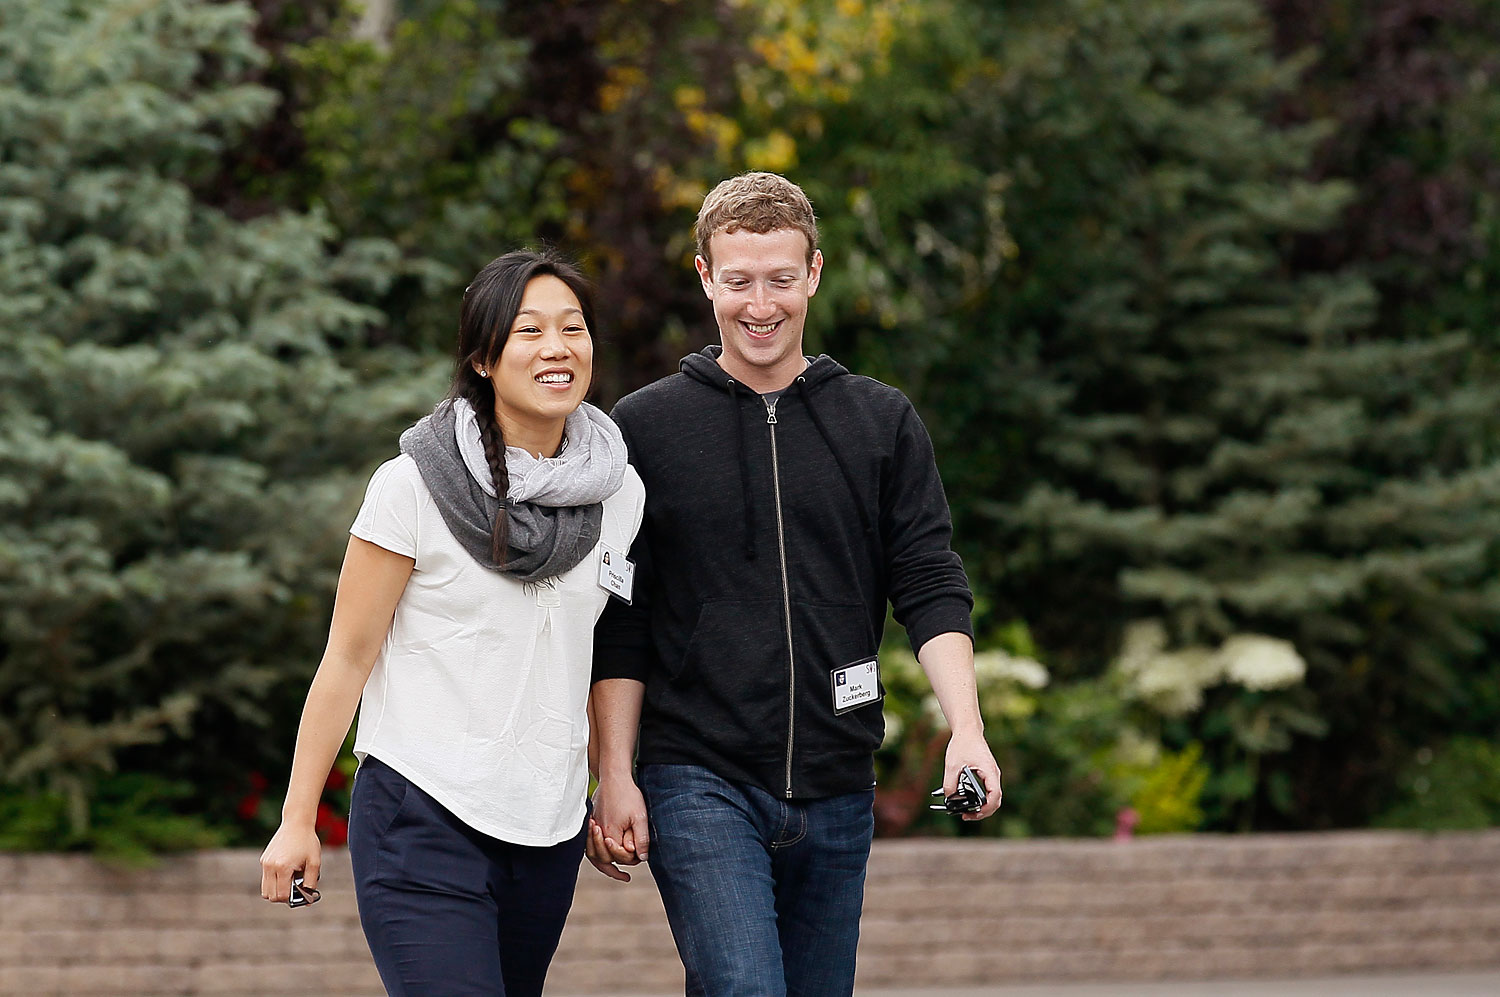 Facebook CEO Zuckerberg walks with wife Priscilla Chan at the annual Allen and Co. conference at the Sun Valley